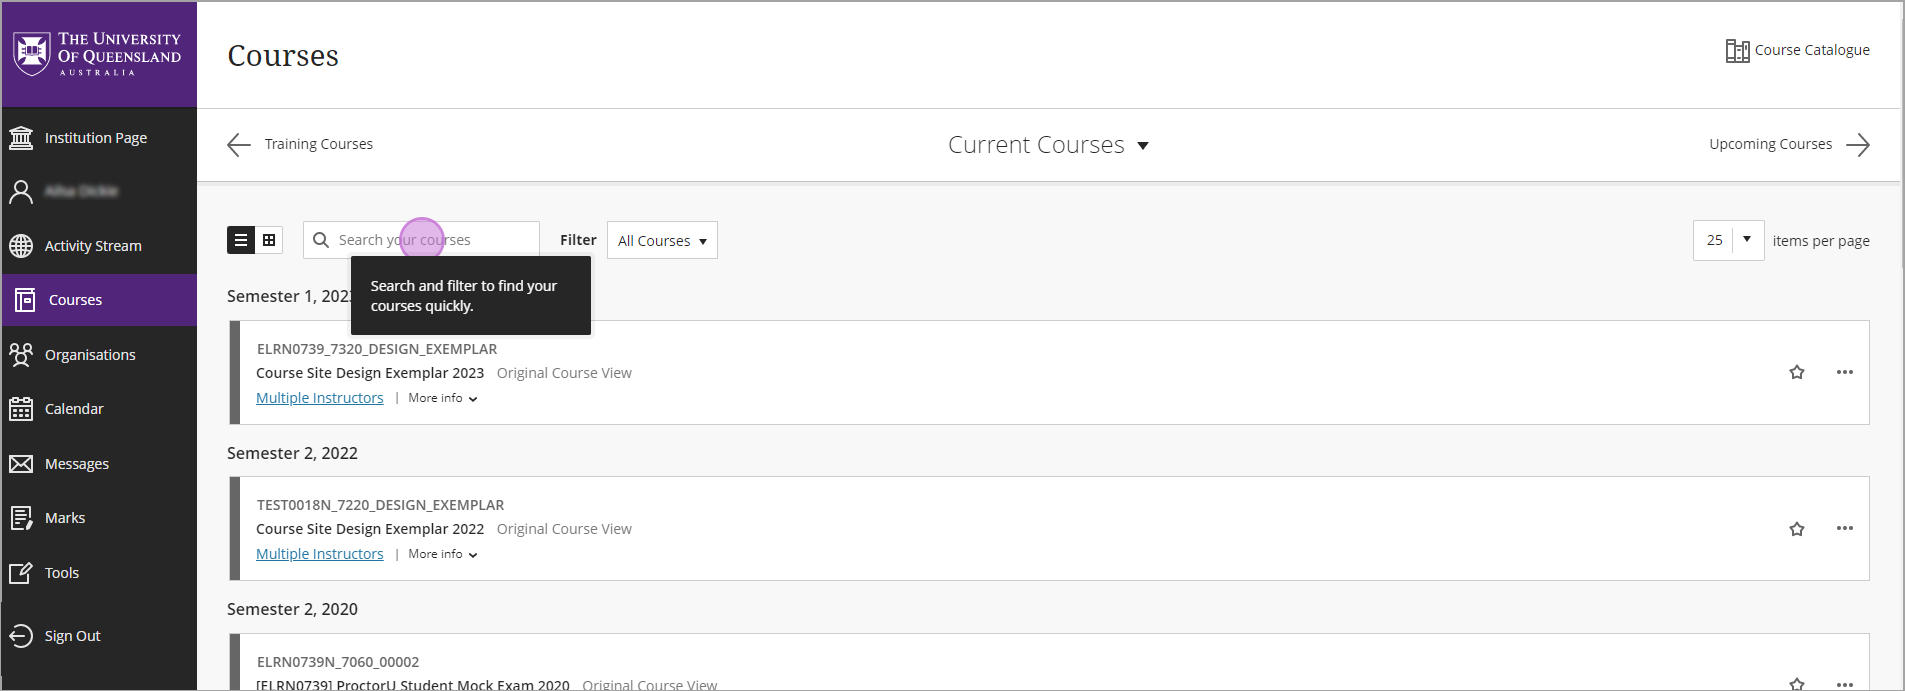 courses page first tip